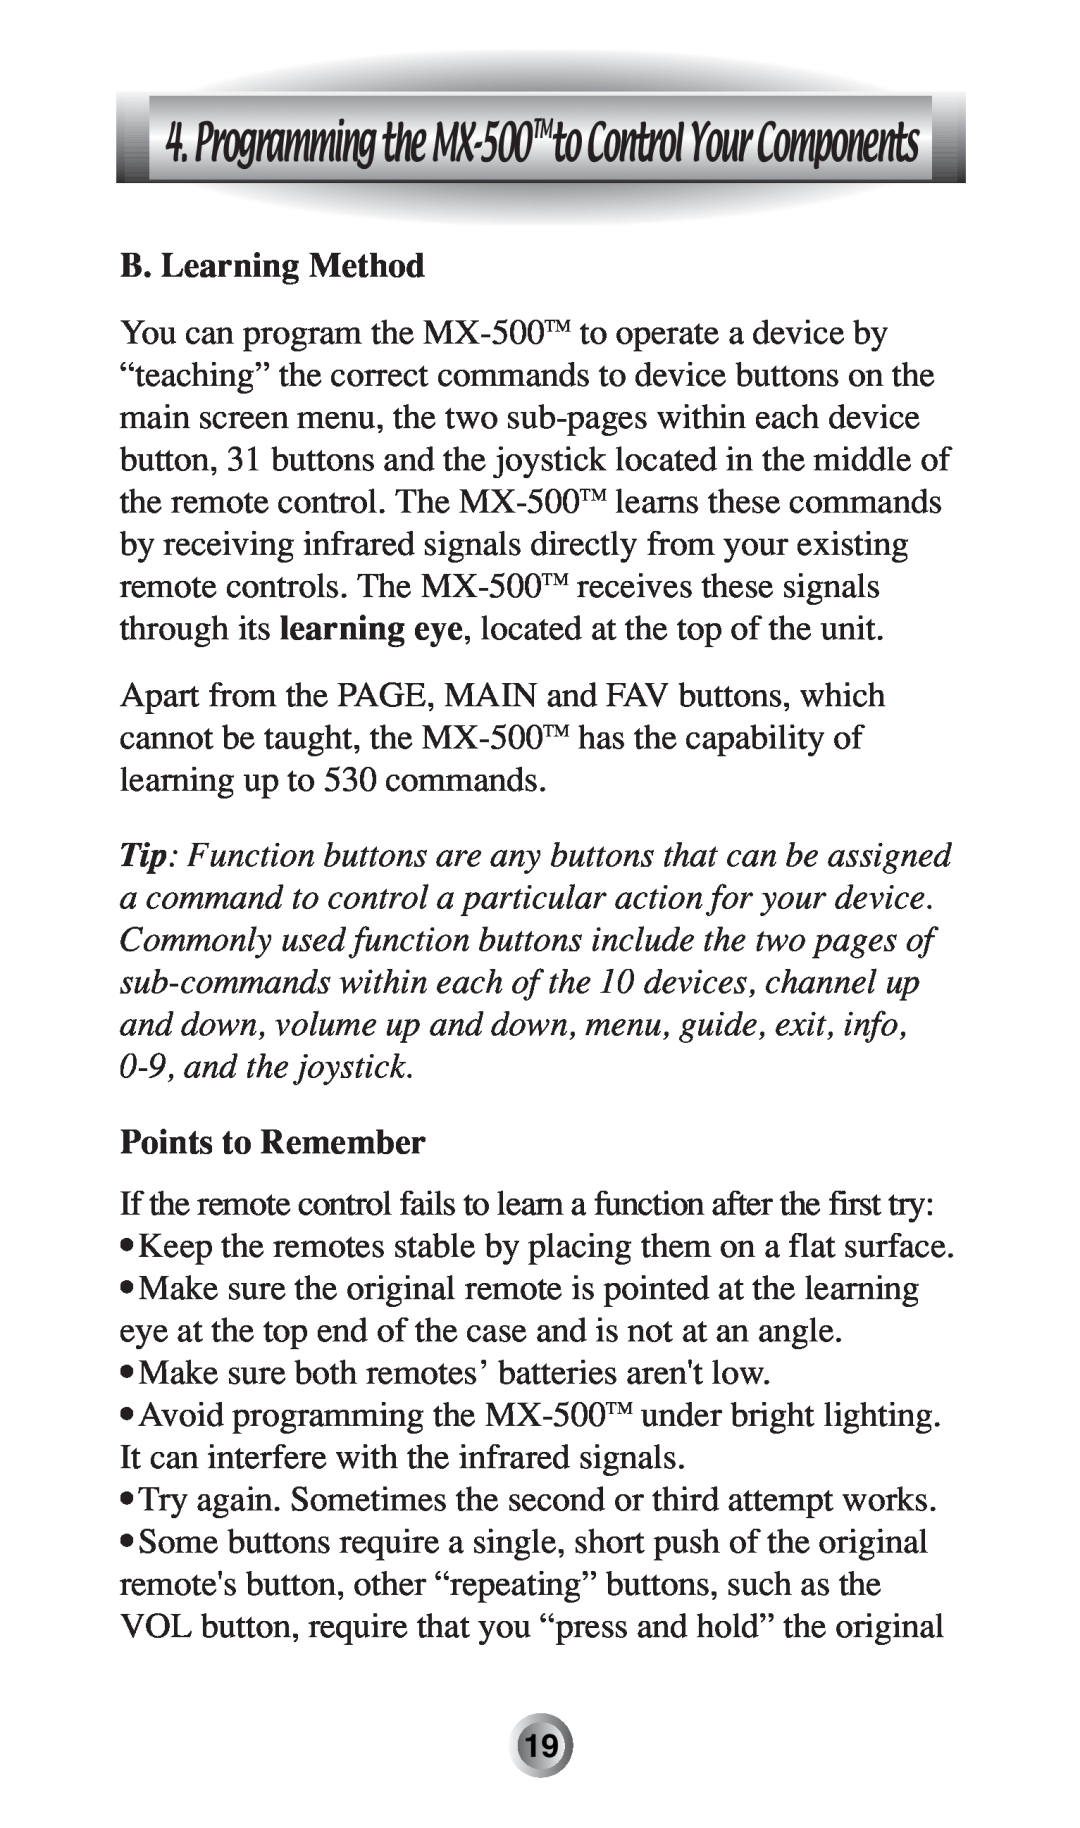 Radio Shack manual ProgrammingtheMX-500TMtoControlYourComponents, B. Learning Method, Points to Remember 